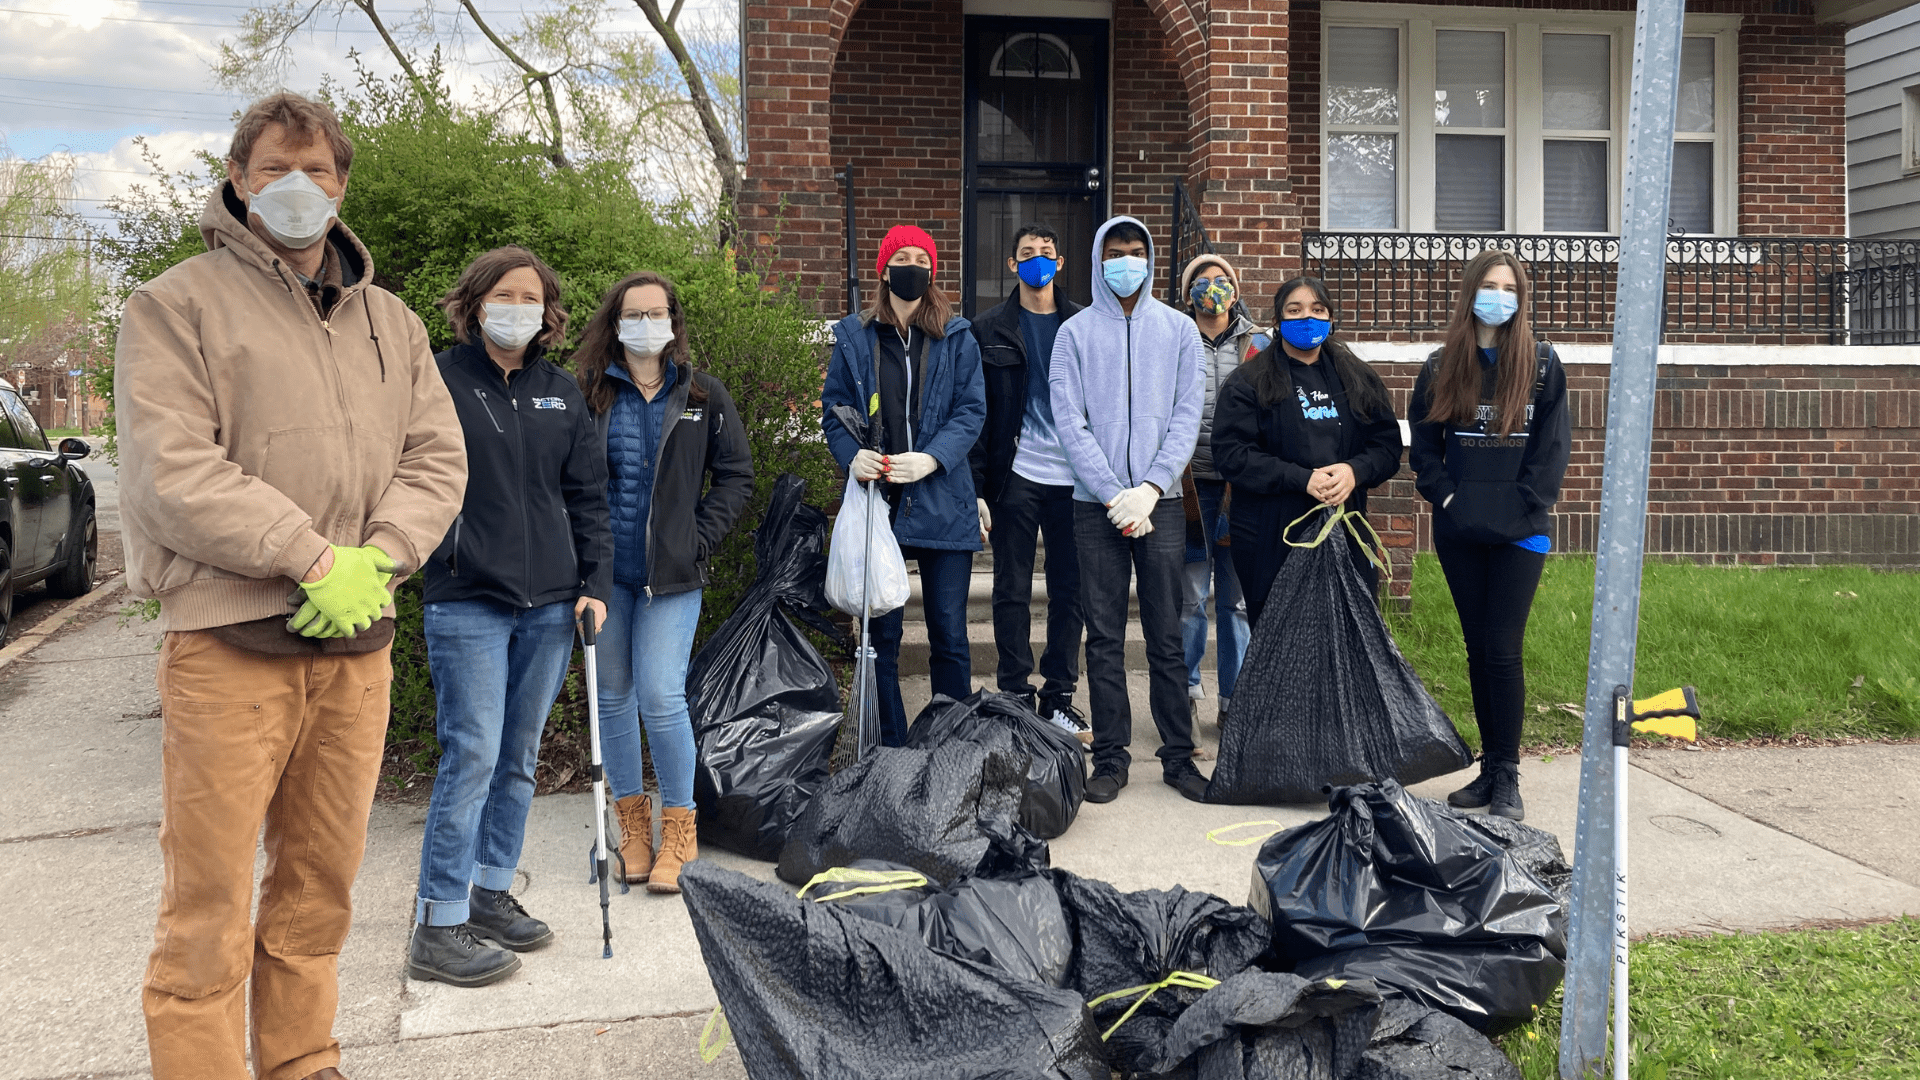 group outdoors conducting a community cleanup